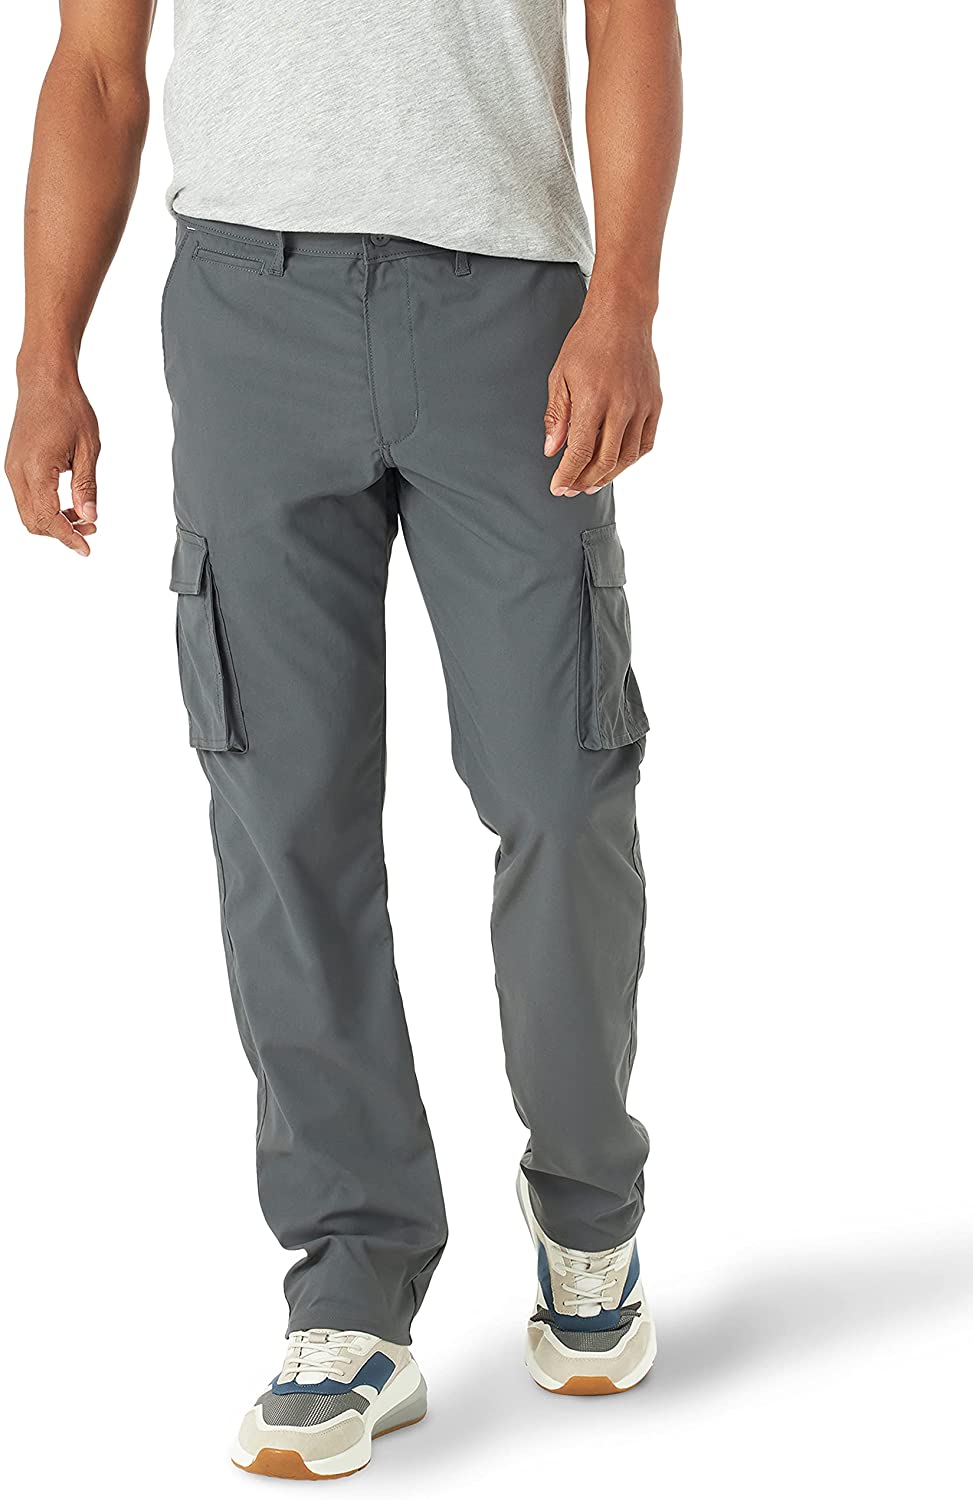 Lee Men's Performance Series Extreme Comfort Synthetic Straight Fit Cargo  Pant | eBay